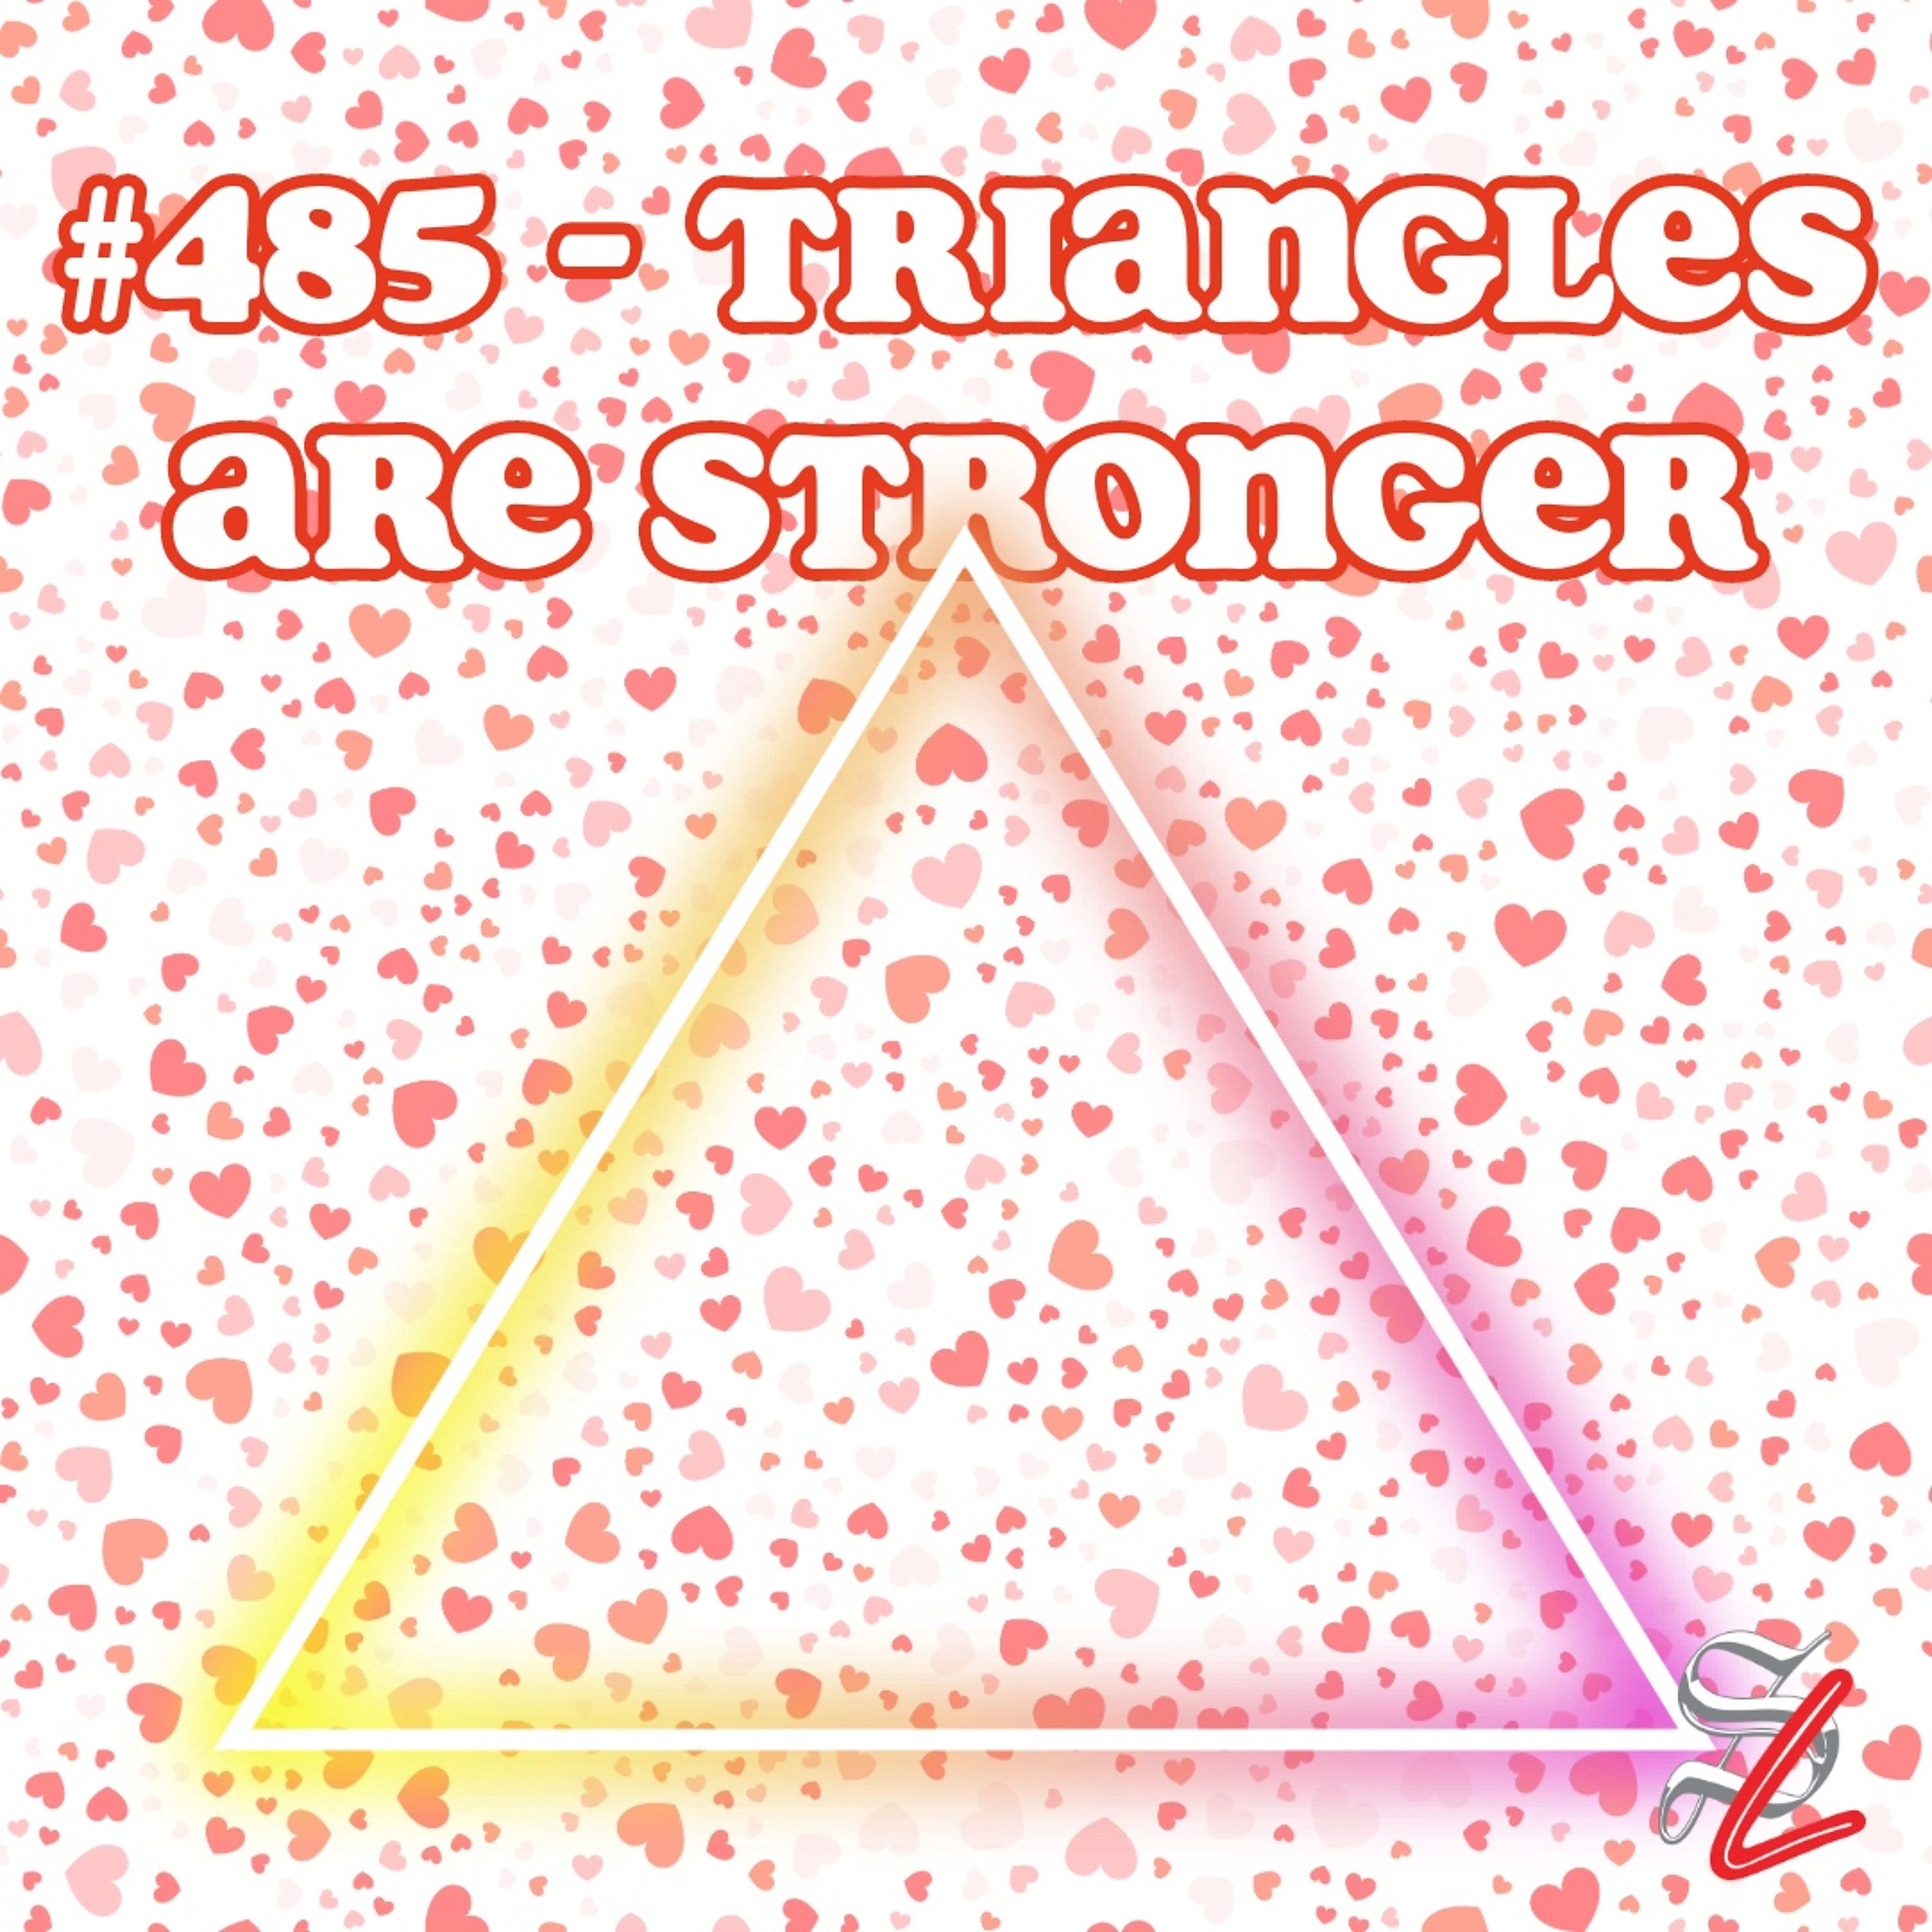 #485 - Triangles Are Stronger